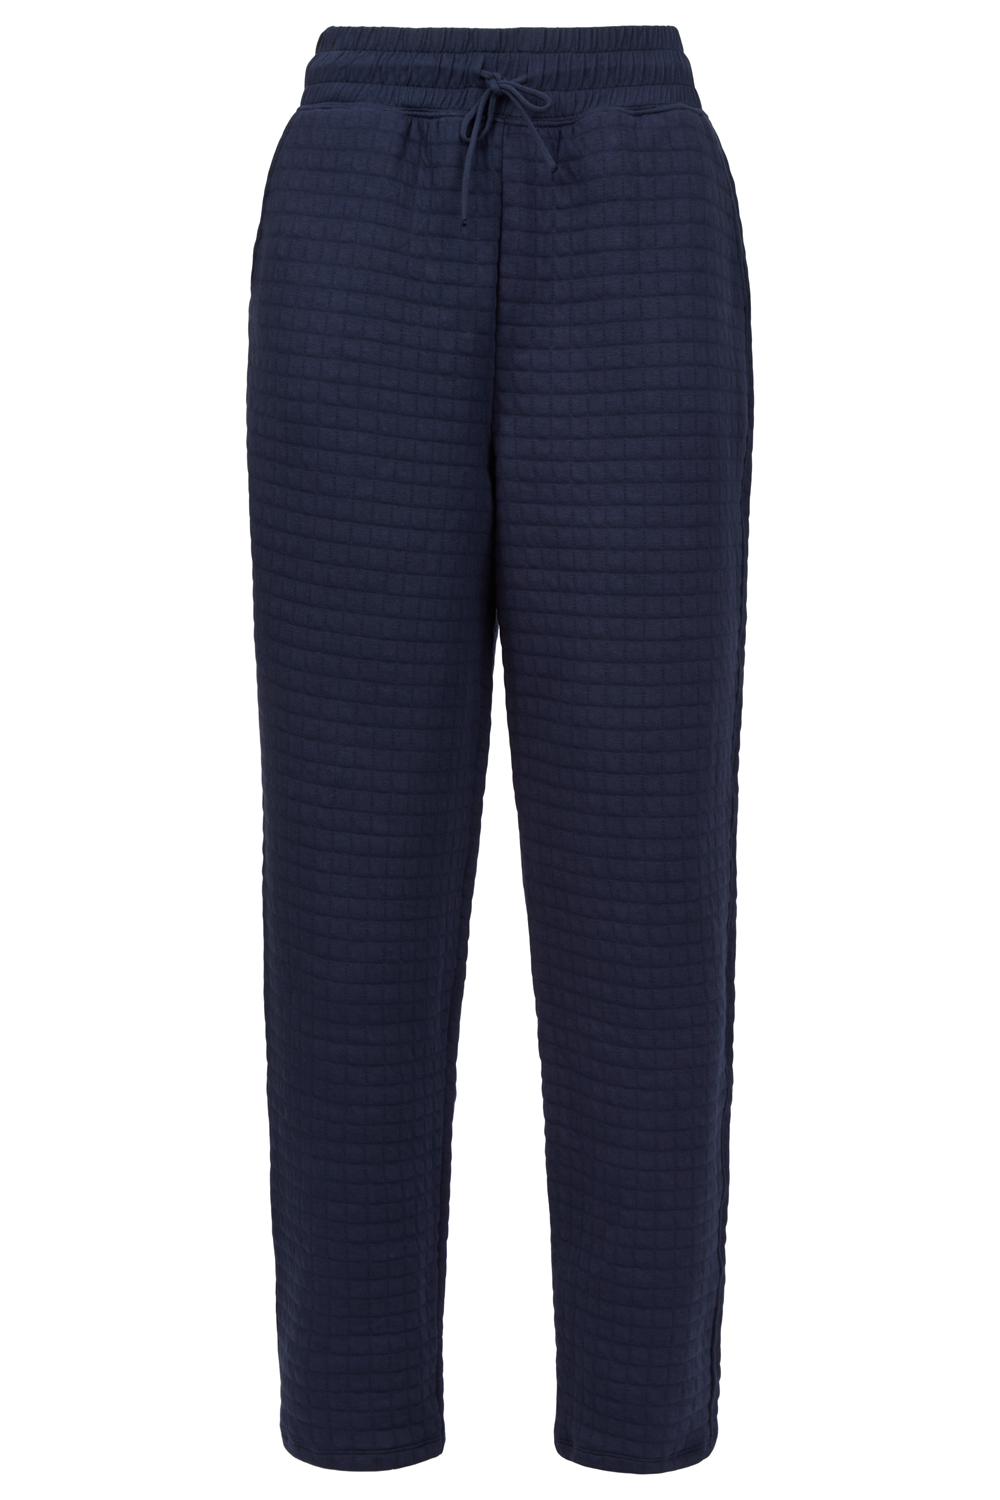 Pantalon Lennon Quilted - People Tree 05